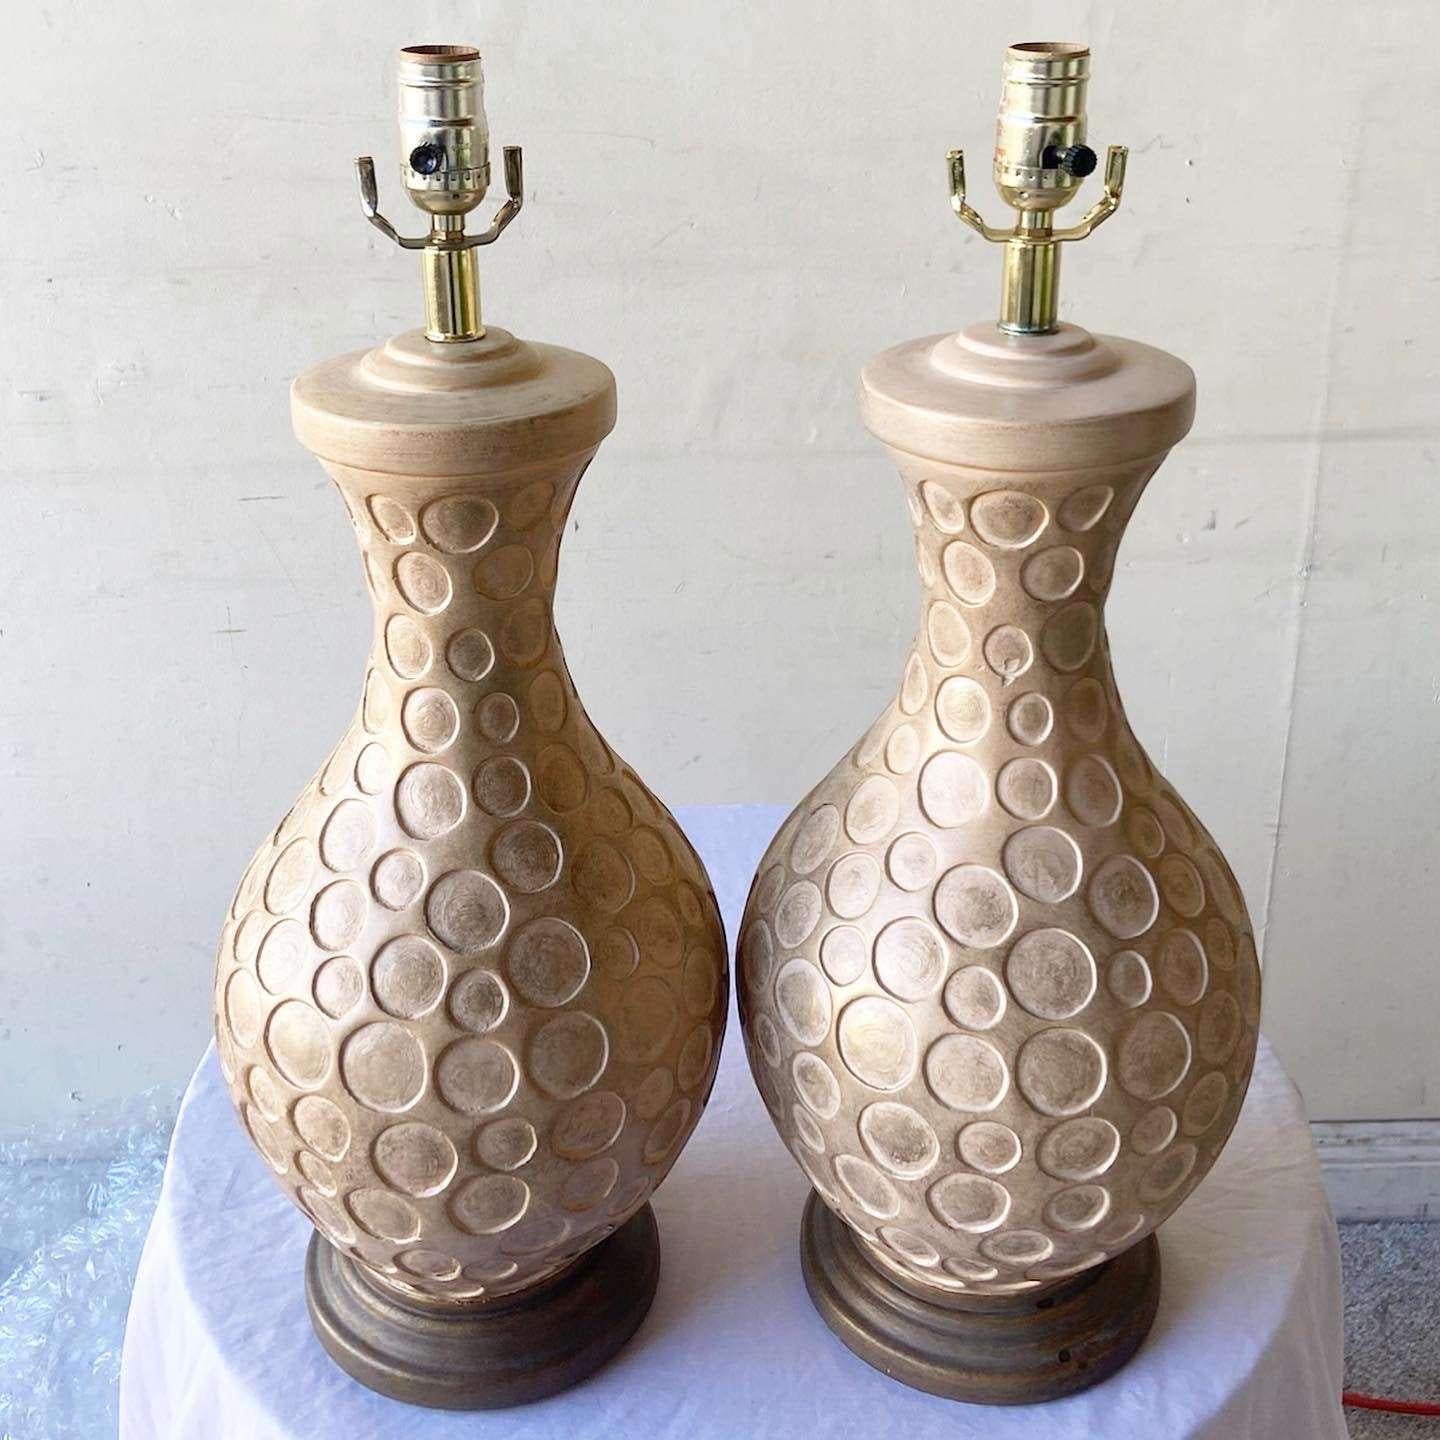 Amazing pair of postmodern table lamps. Each feature a tan body tessellated with circles.
